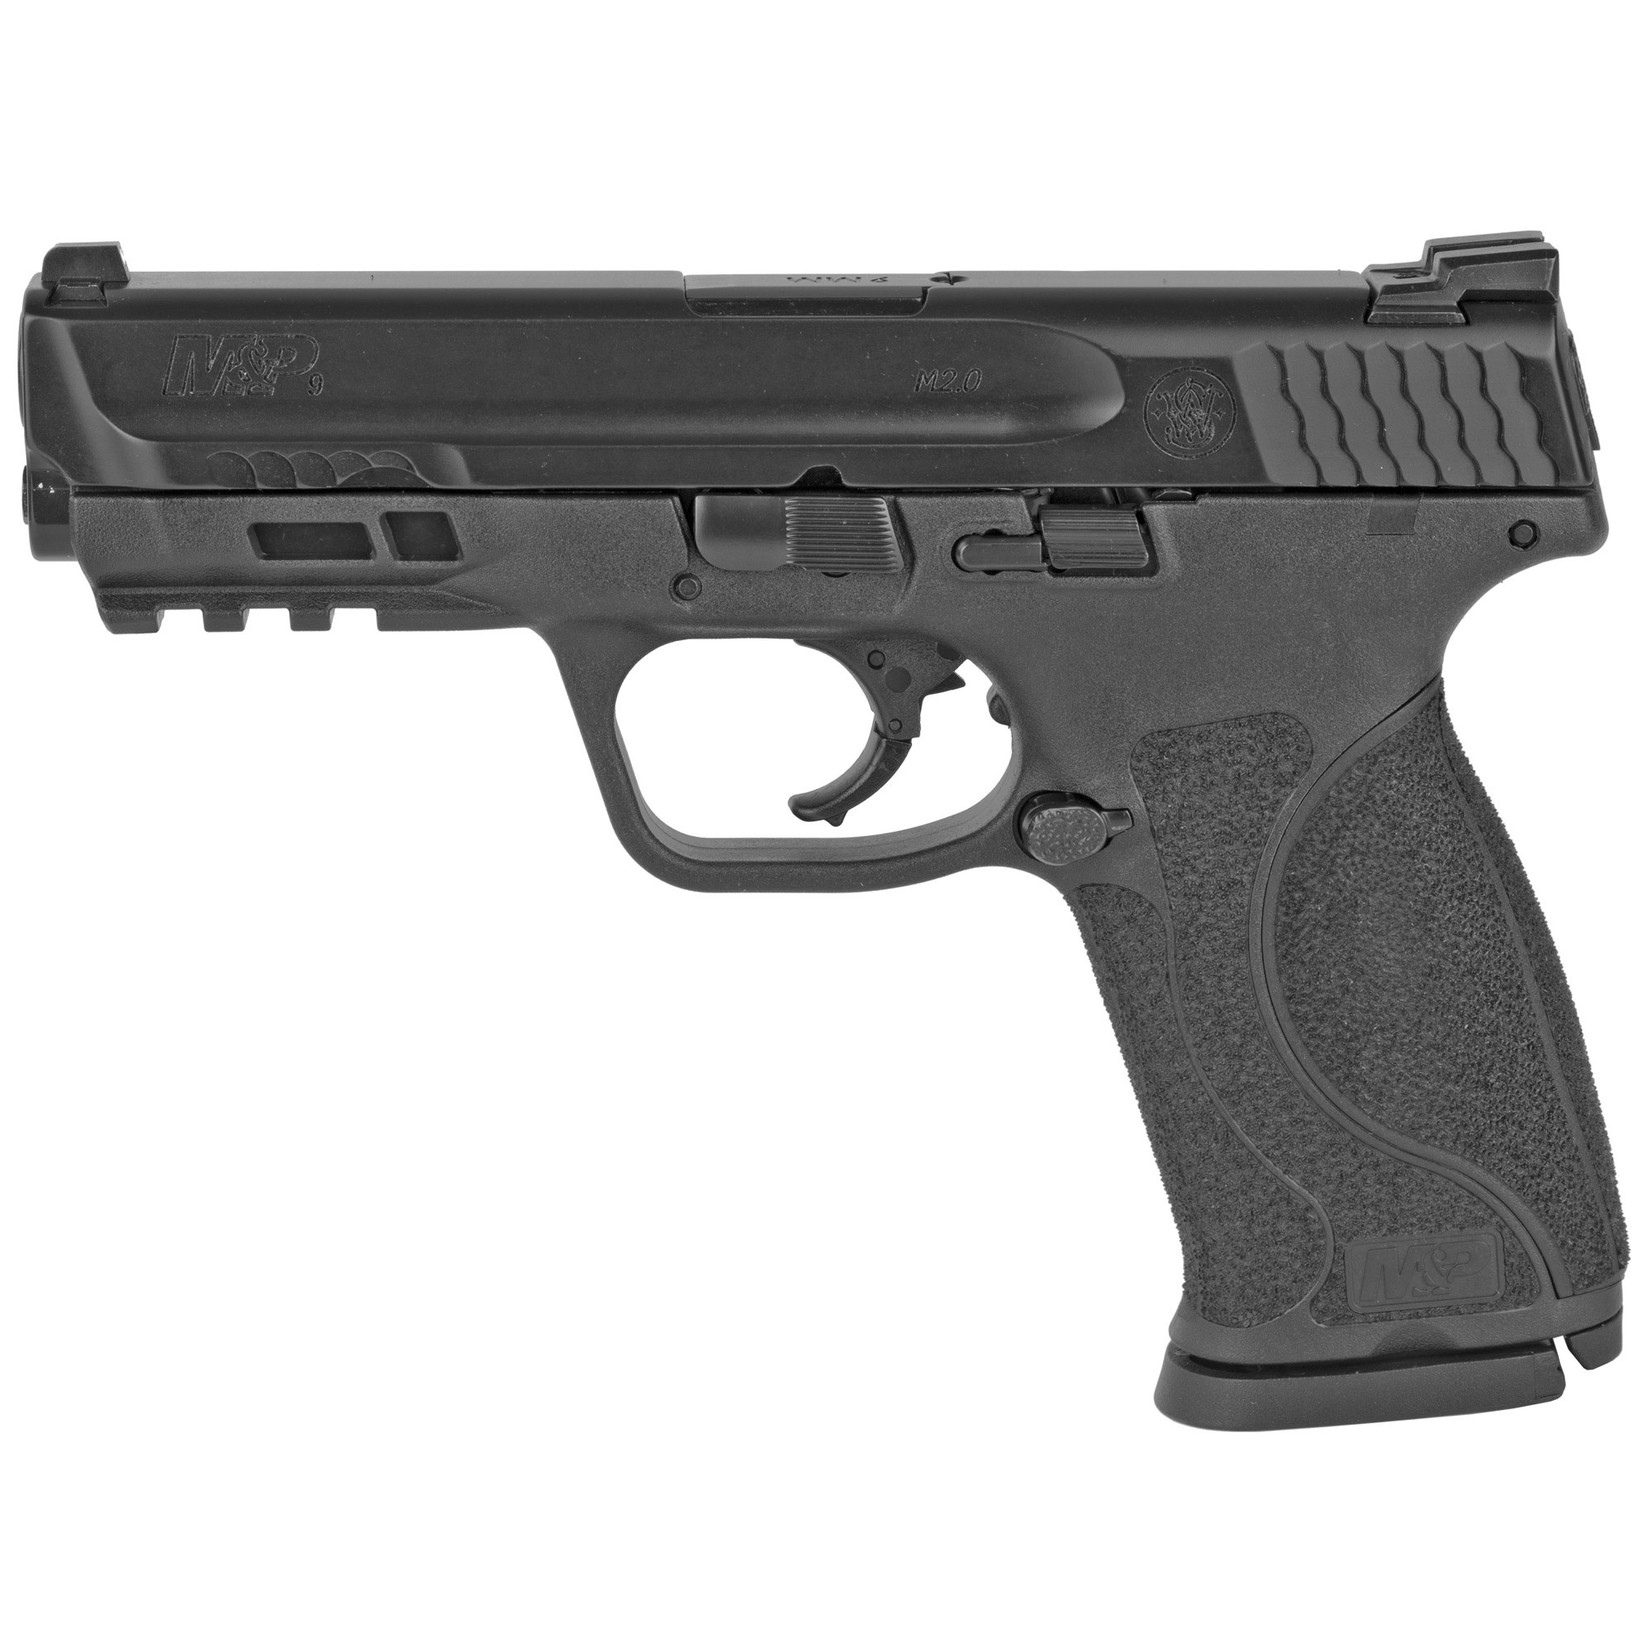 SMITH & WESSON SMITH & WESSON M&P9 M2.0 CARRY & RANGE KIT 9MM 17RD 4.25" BBL